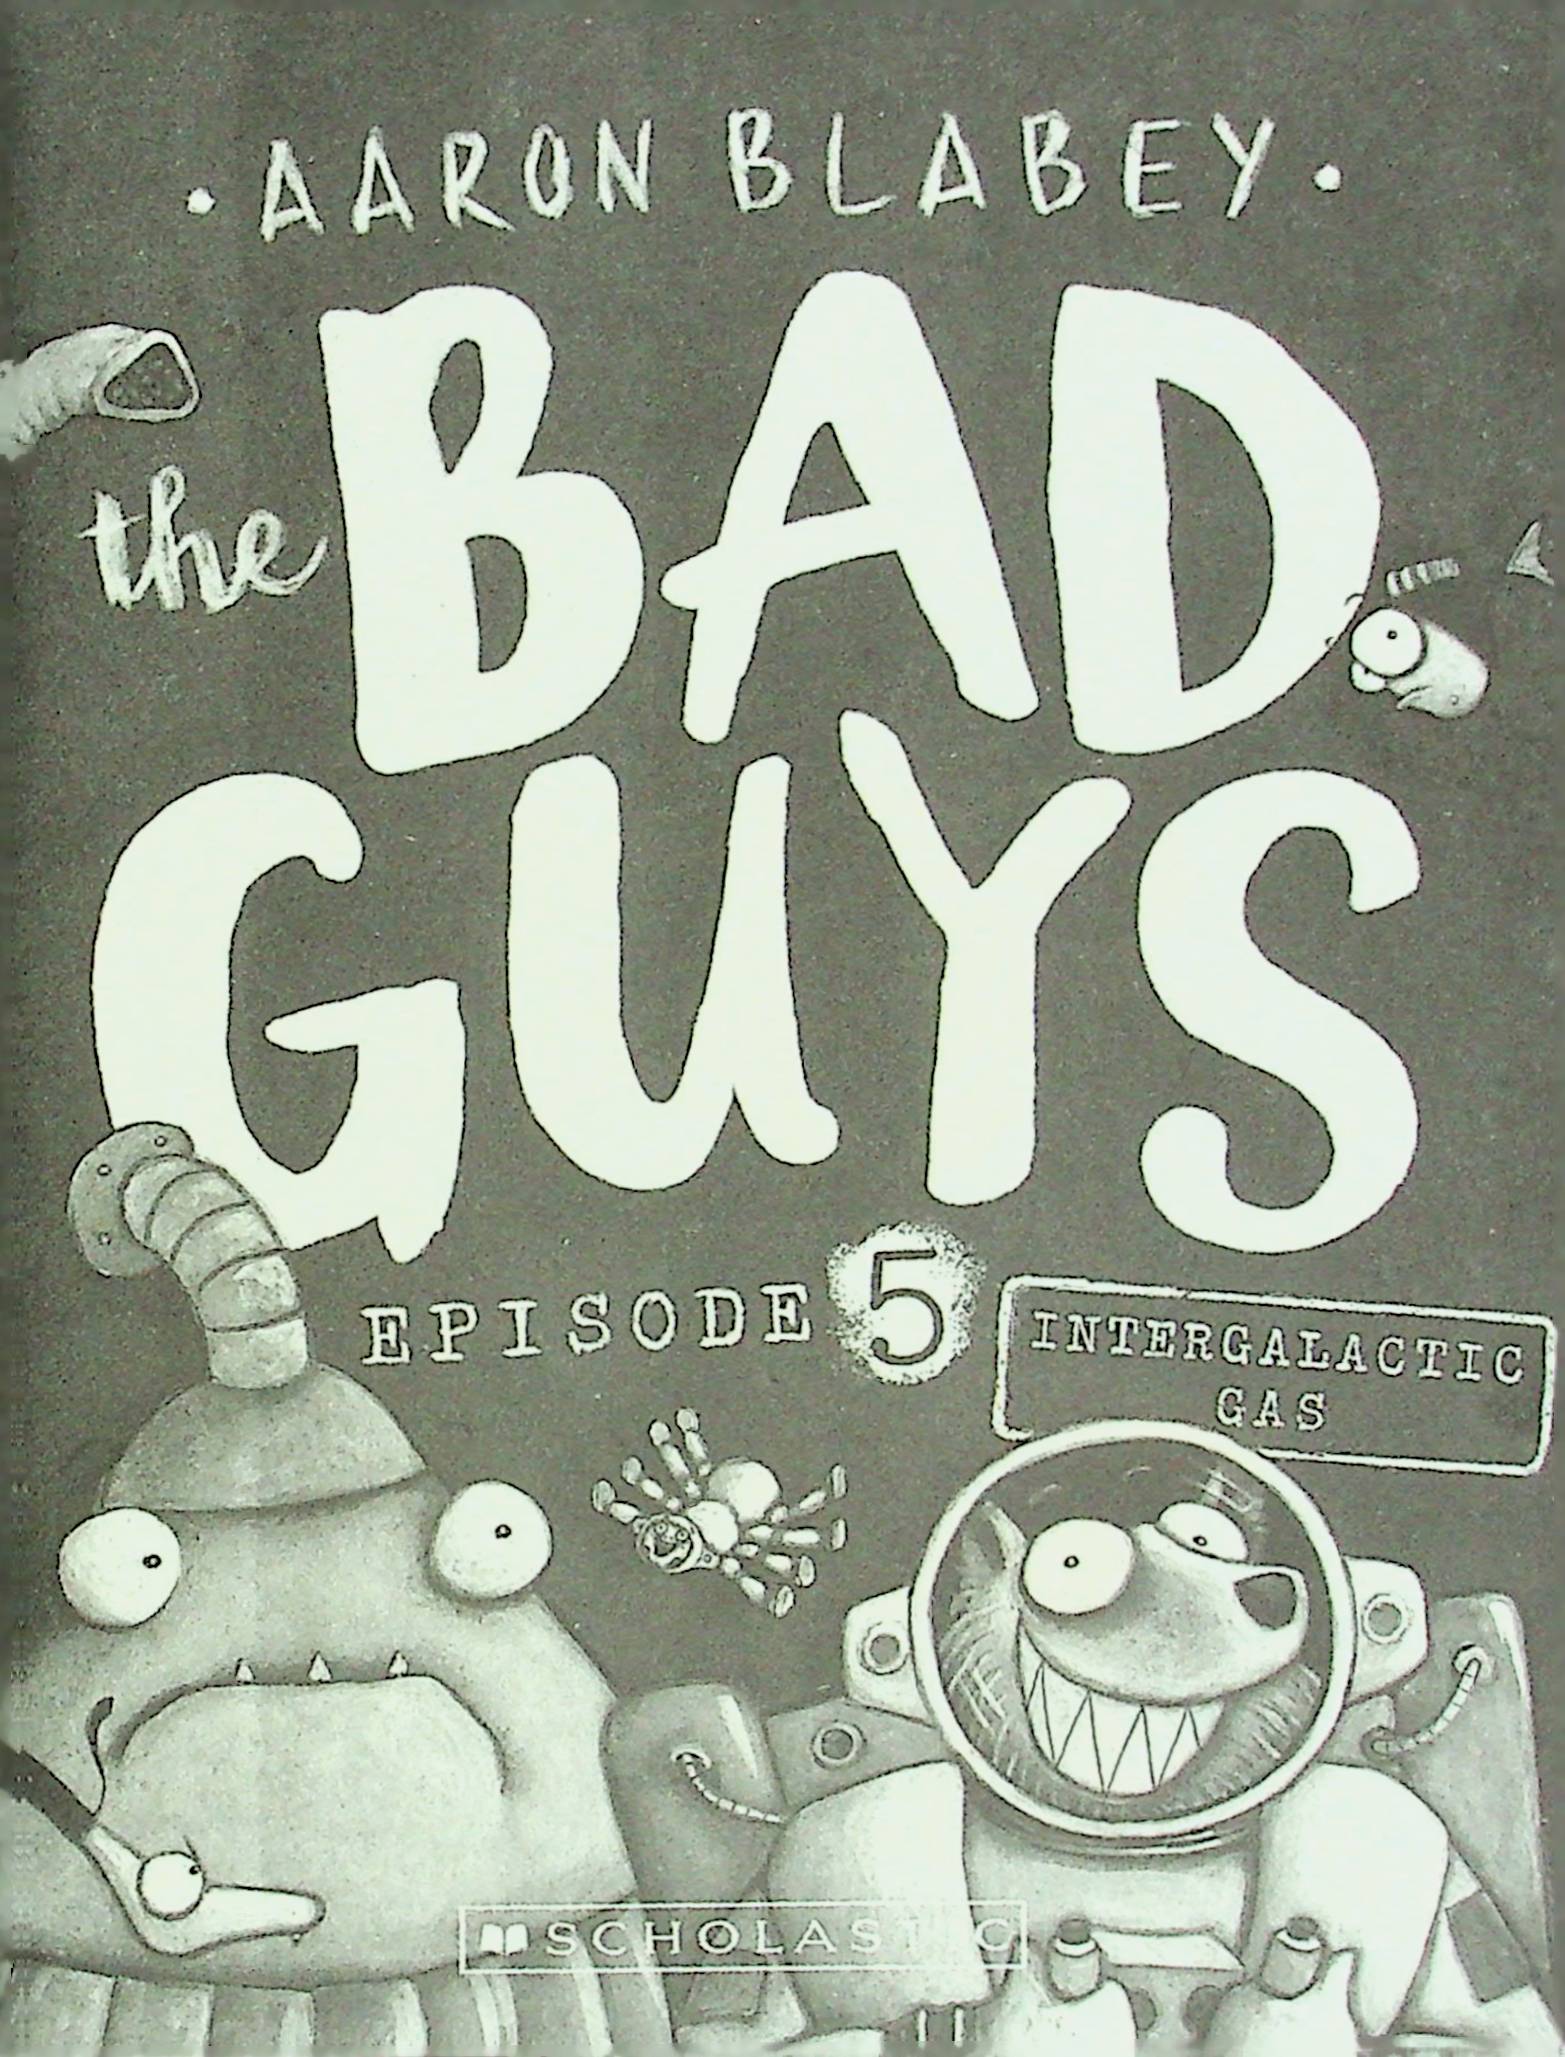 The Bad Guys - Episode 5: Intergalactic Gas